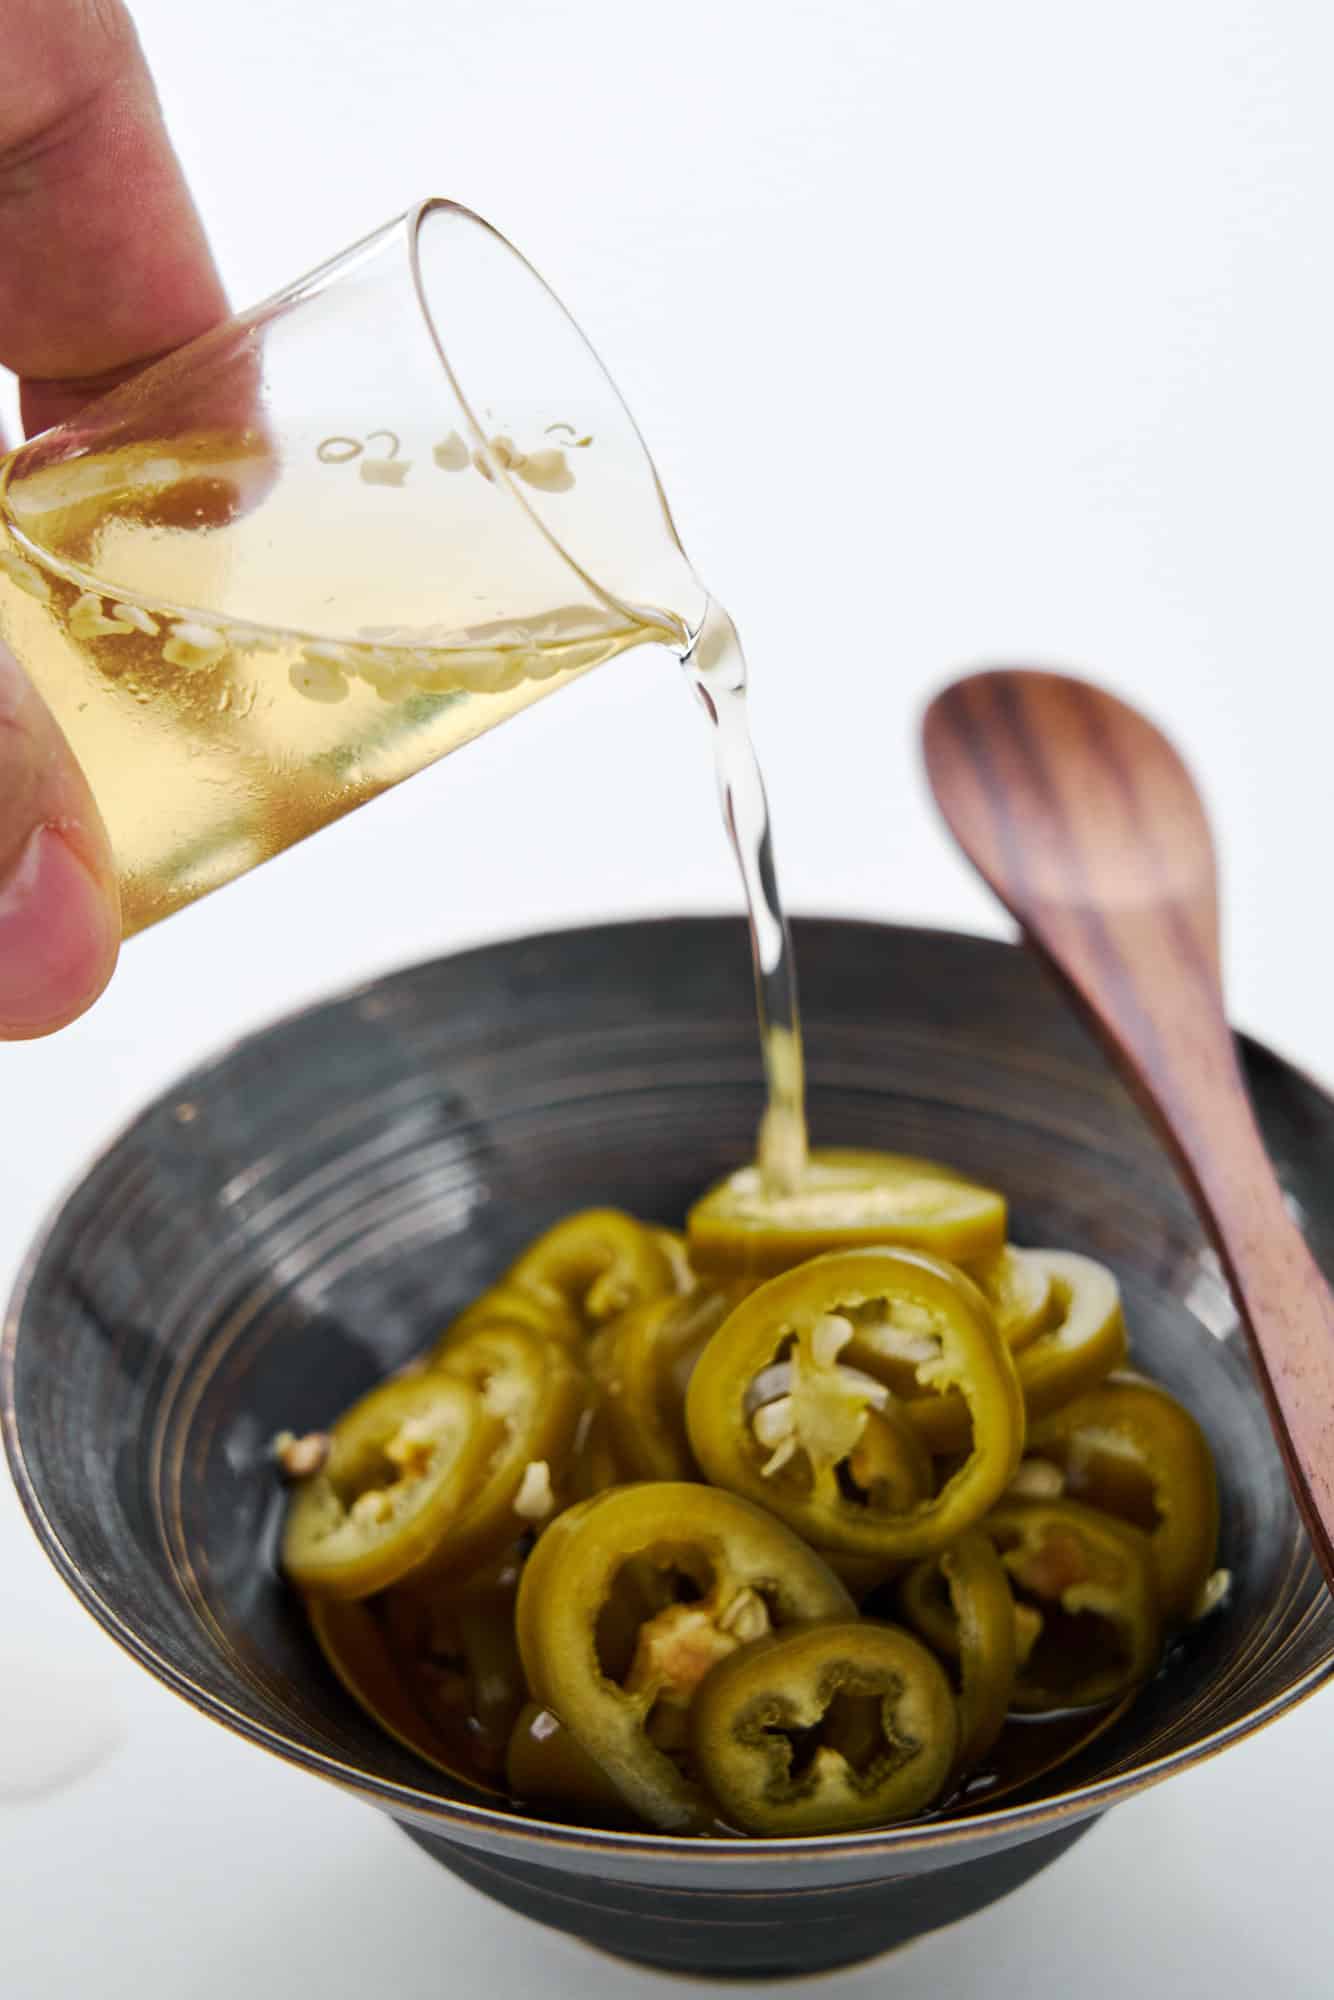 This pickled chili pepper recipe creates pickled jalapenos and spicy chili vinegar.